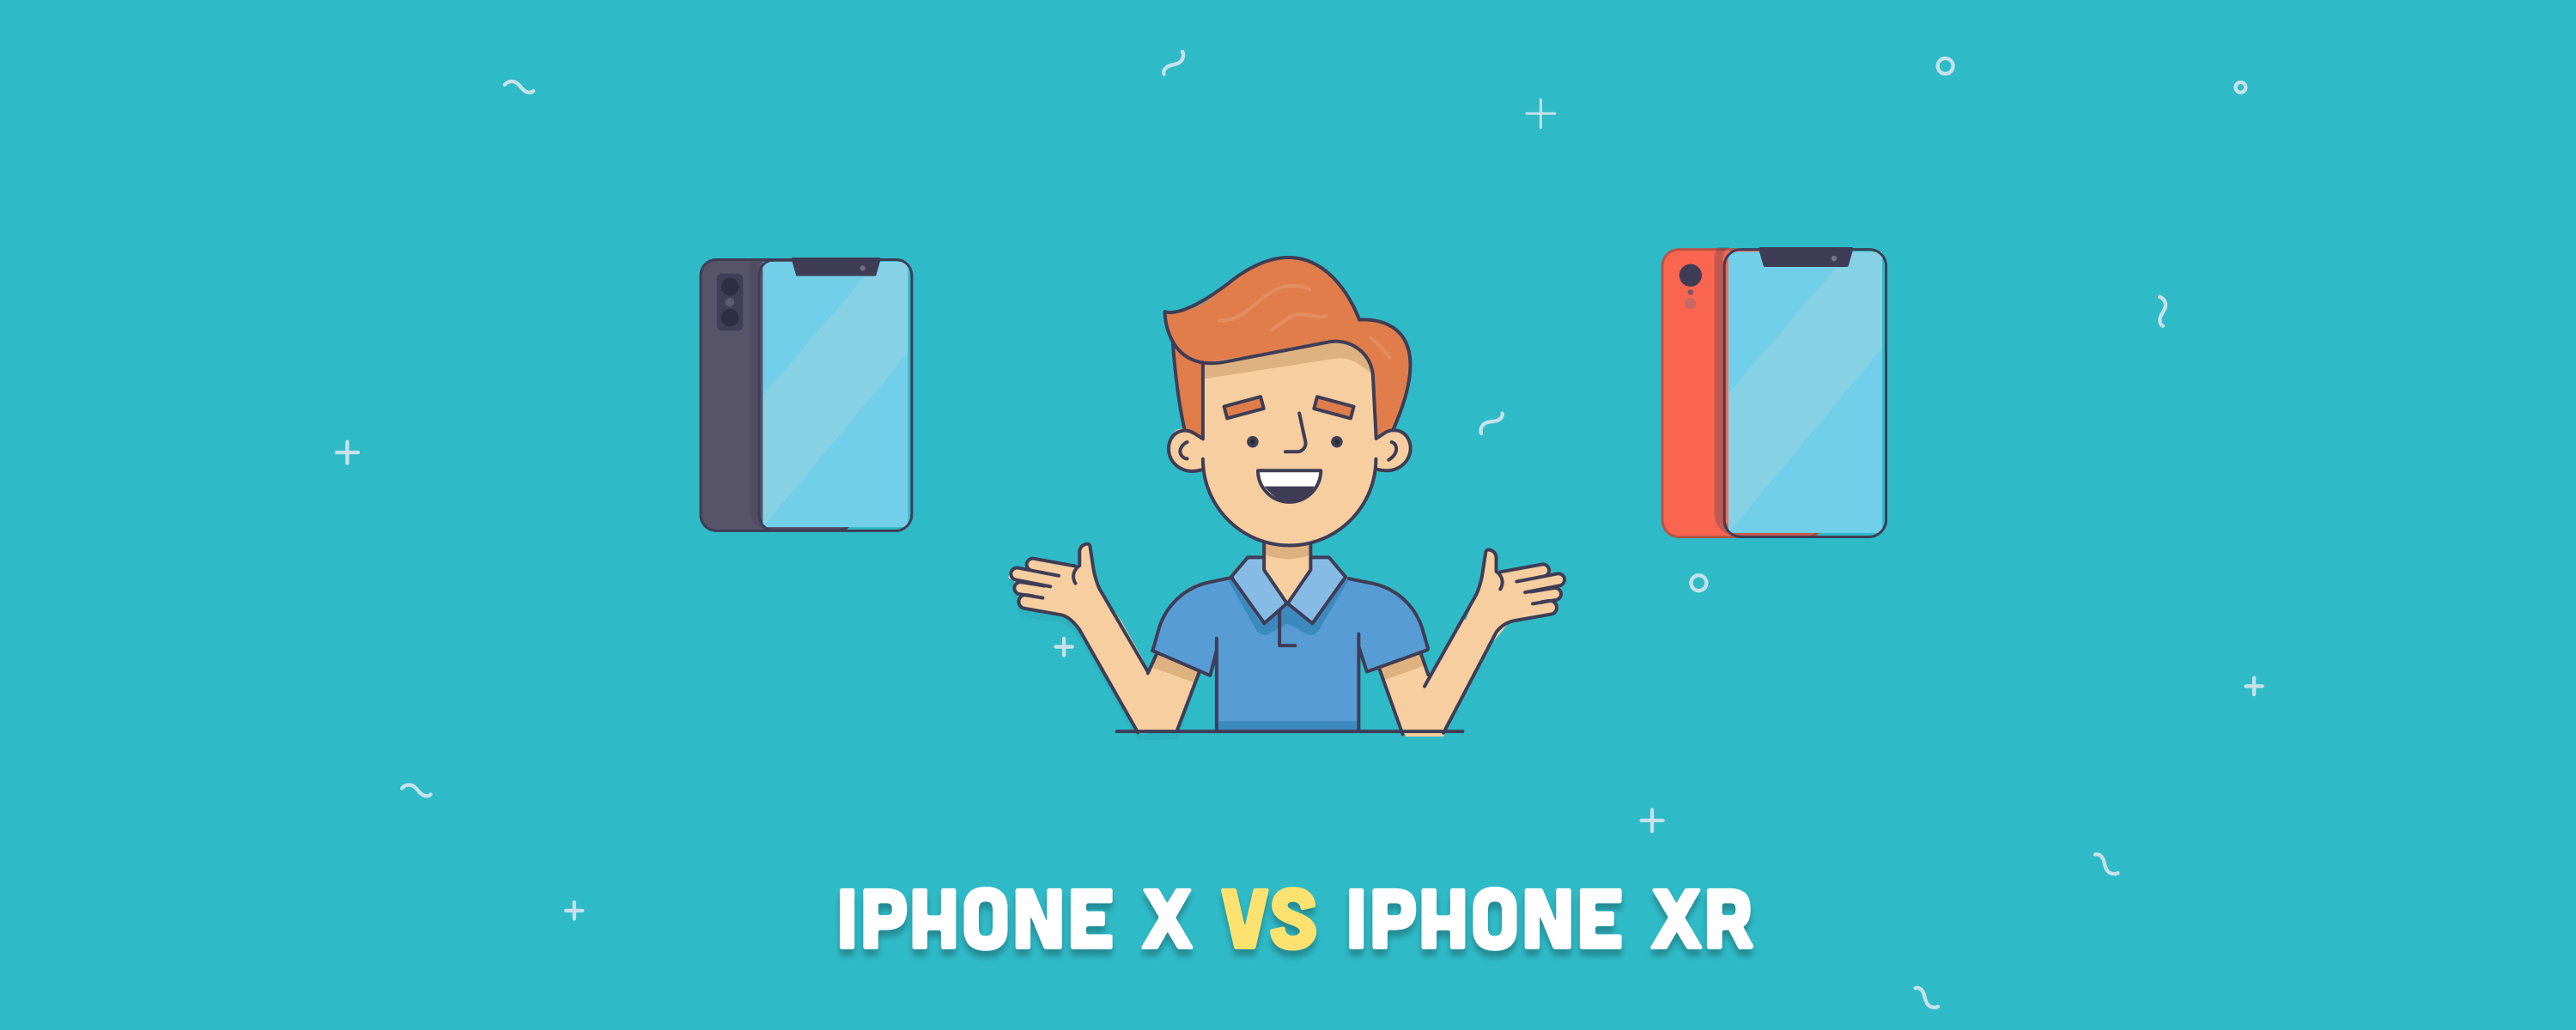 iPhone X vs. iPhone XR: Which One Is Better and Why?